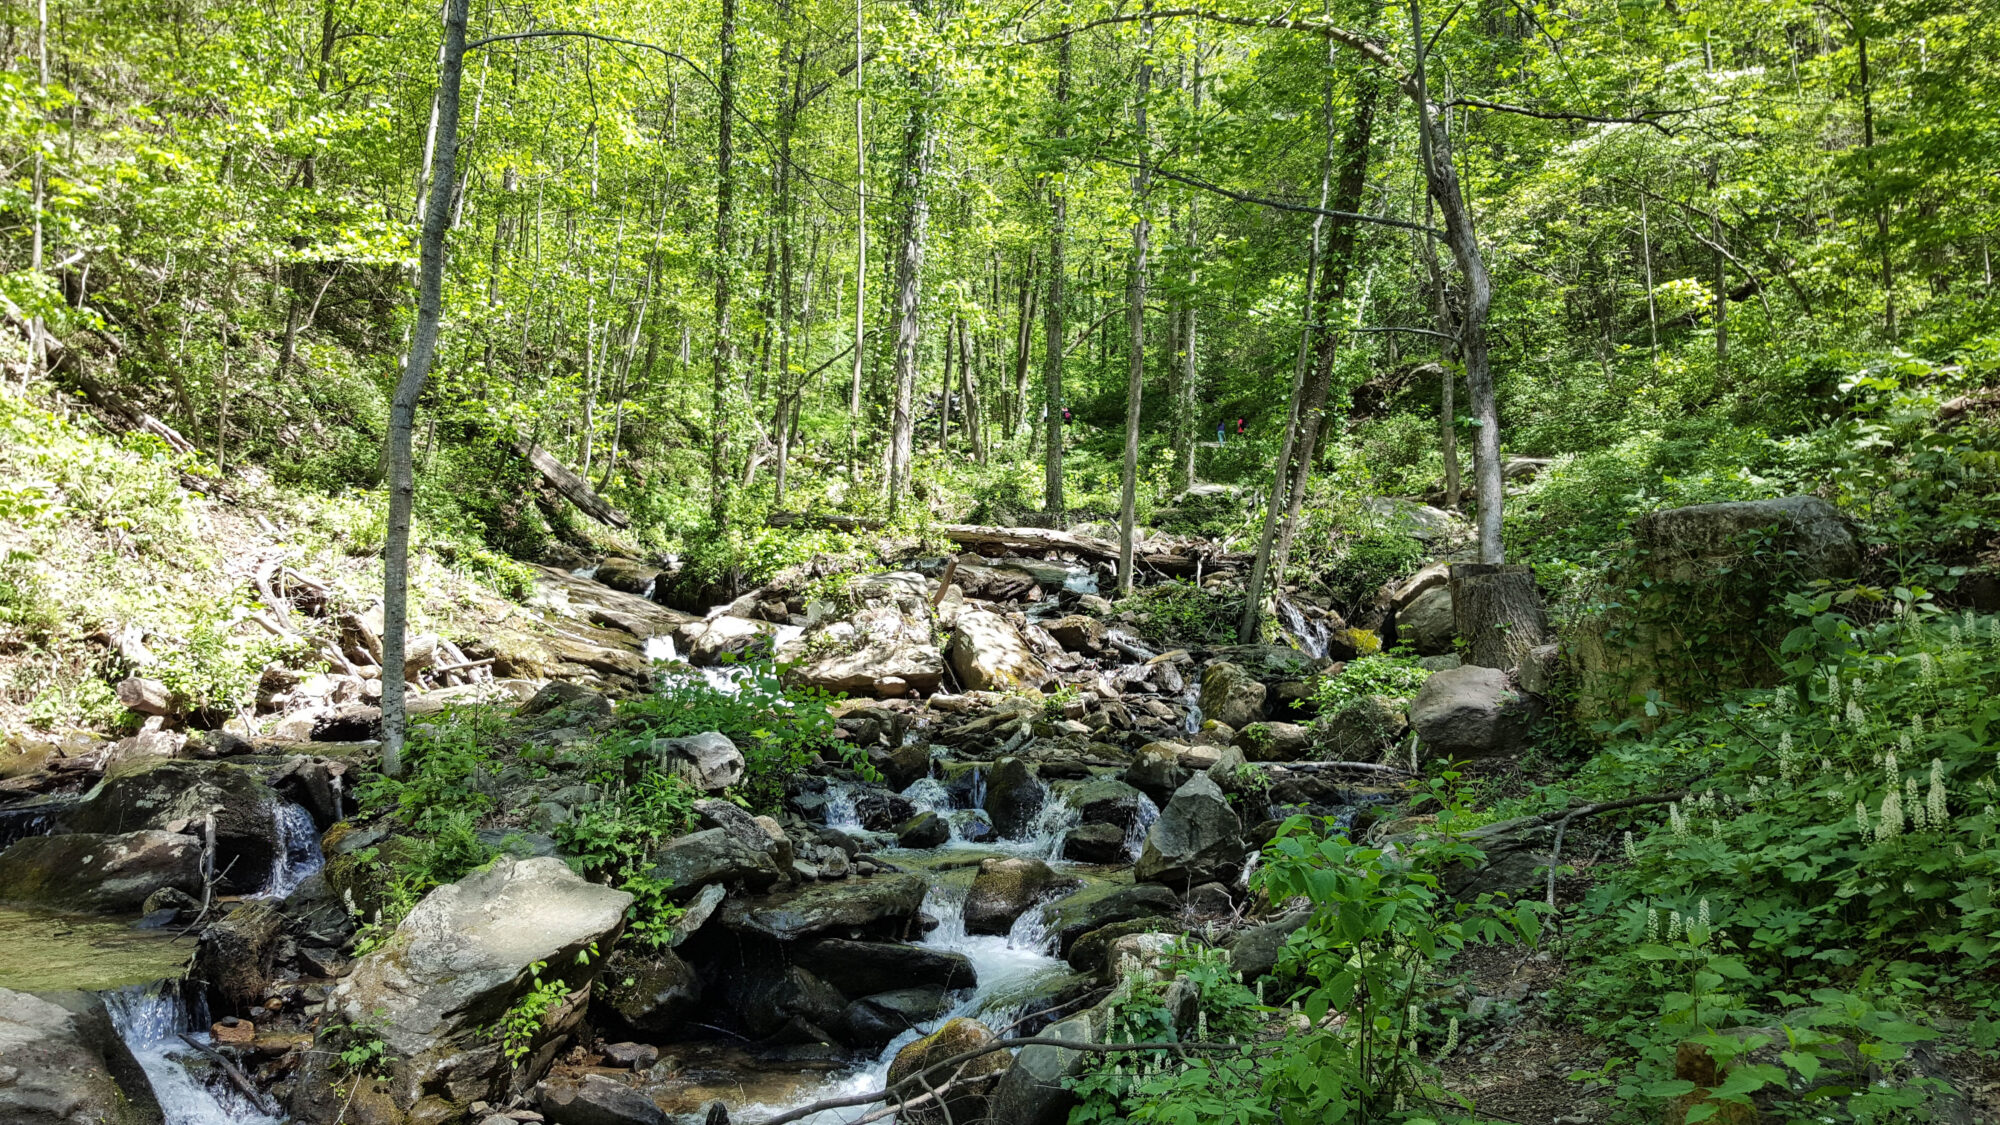 Little Amicalola Creek at the base of the falls